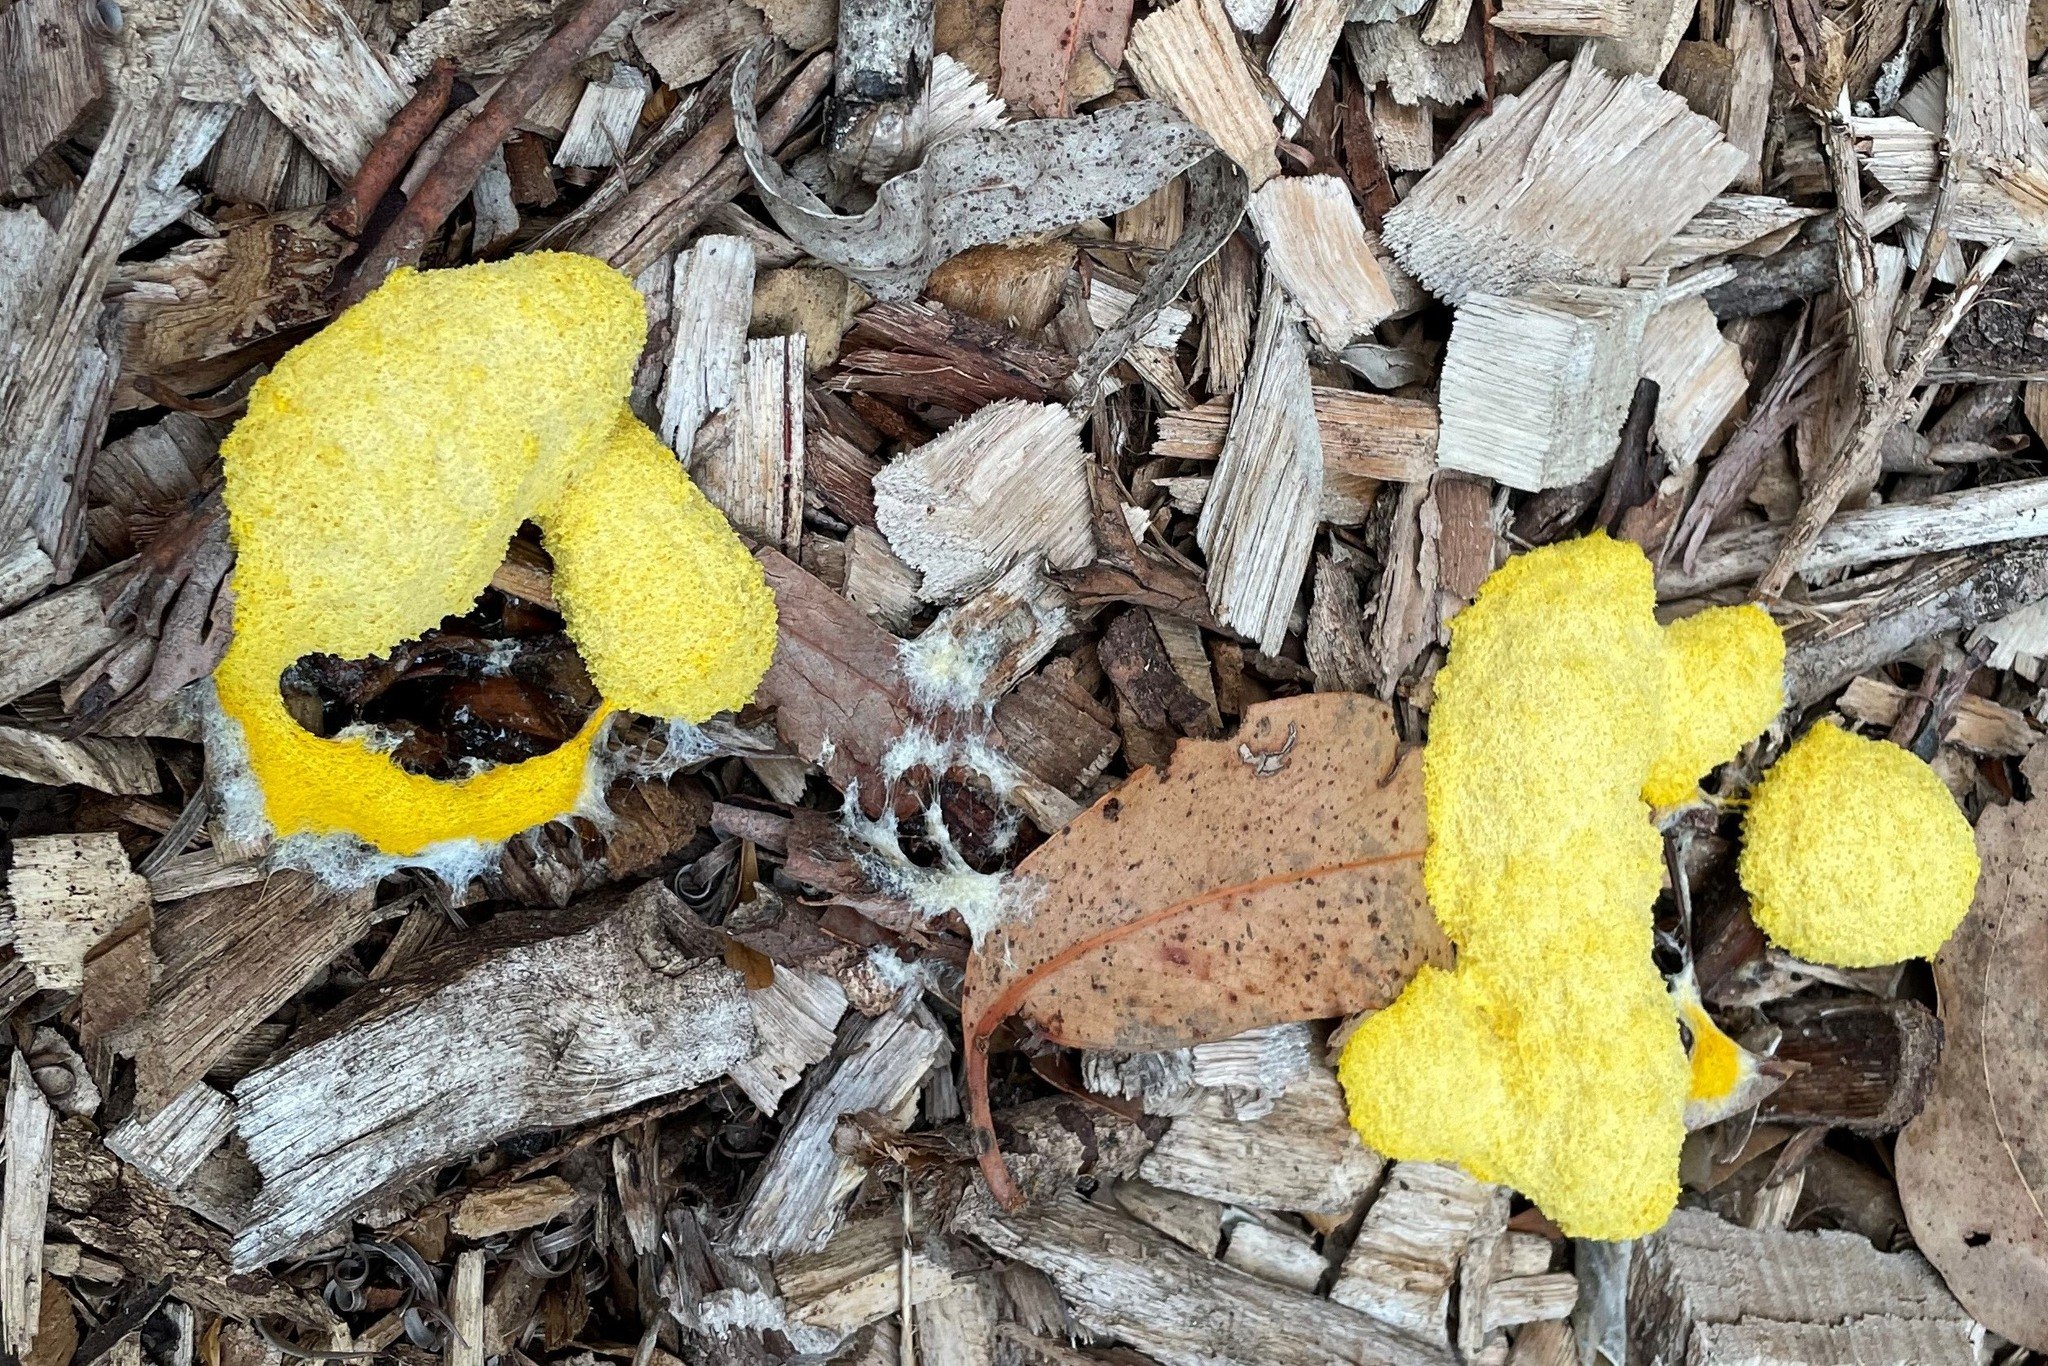 Flora&hellip;err, Fungi&hellip;sorry, Slime Mould Friday!

Tomorrow is Star Wars Day (May the Fourth be with you), so we&rsquo;re looking at one of the more alien-like life forms spotted here. Slime Moulds are neither animal, plant or fungi, but are 